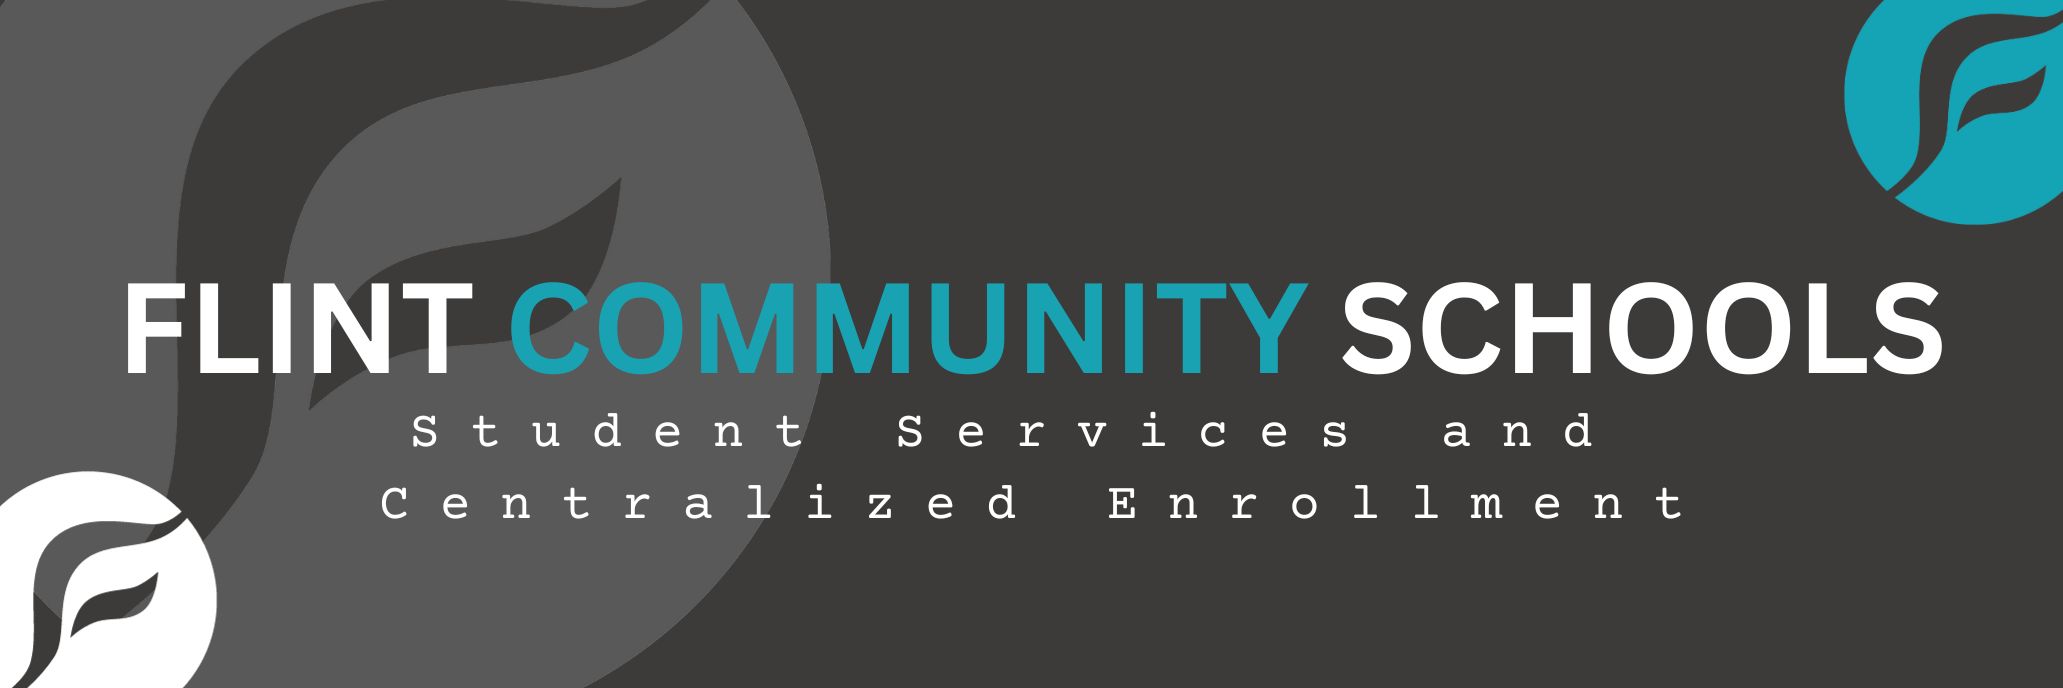 Flint Community Schools Student Services and Centralized Enrollment Office Banner